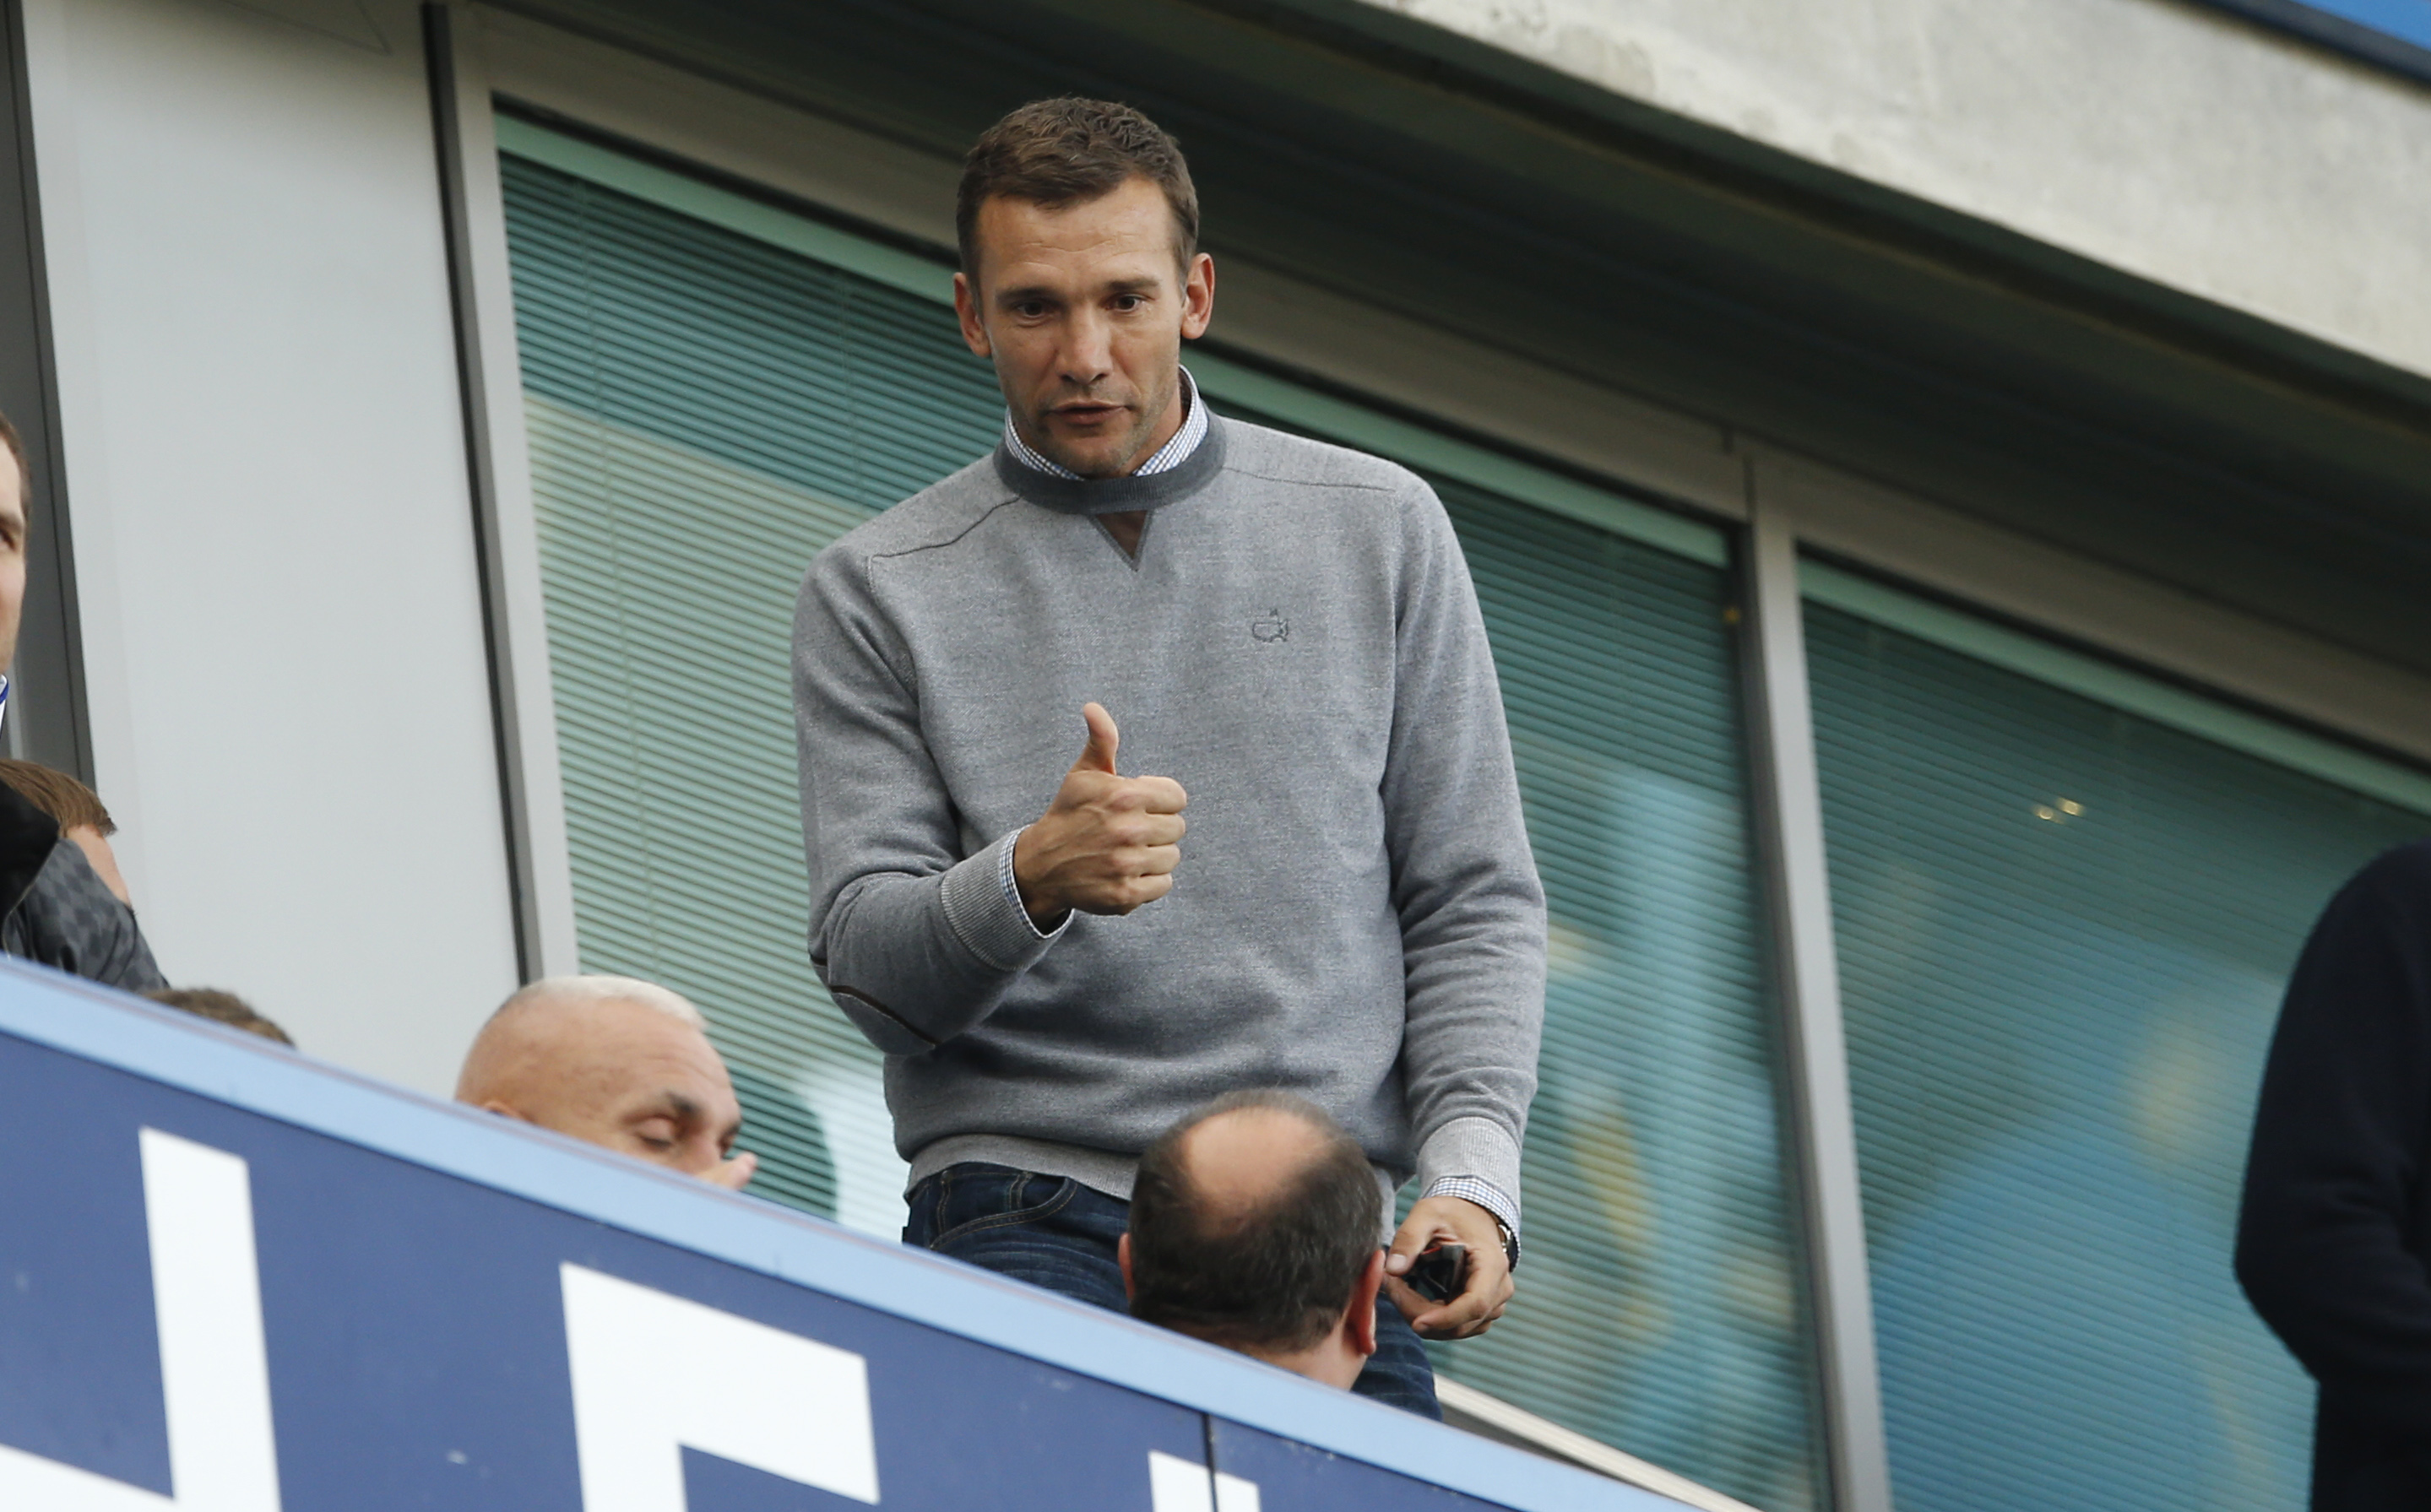 Former Chelsea player Andriy Shevchenko before the match on November 27, 2015. Photo: Reuters